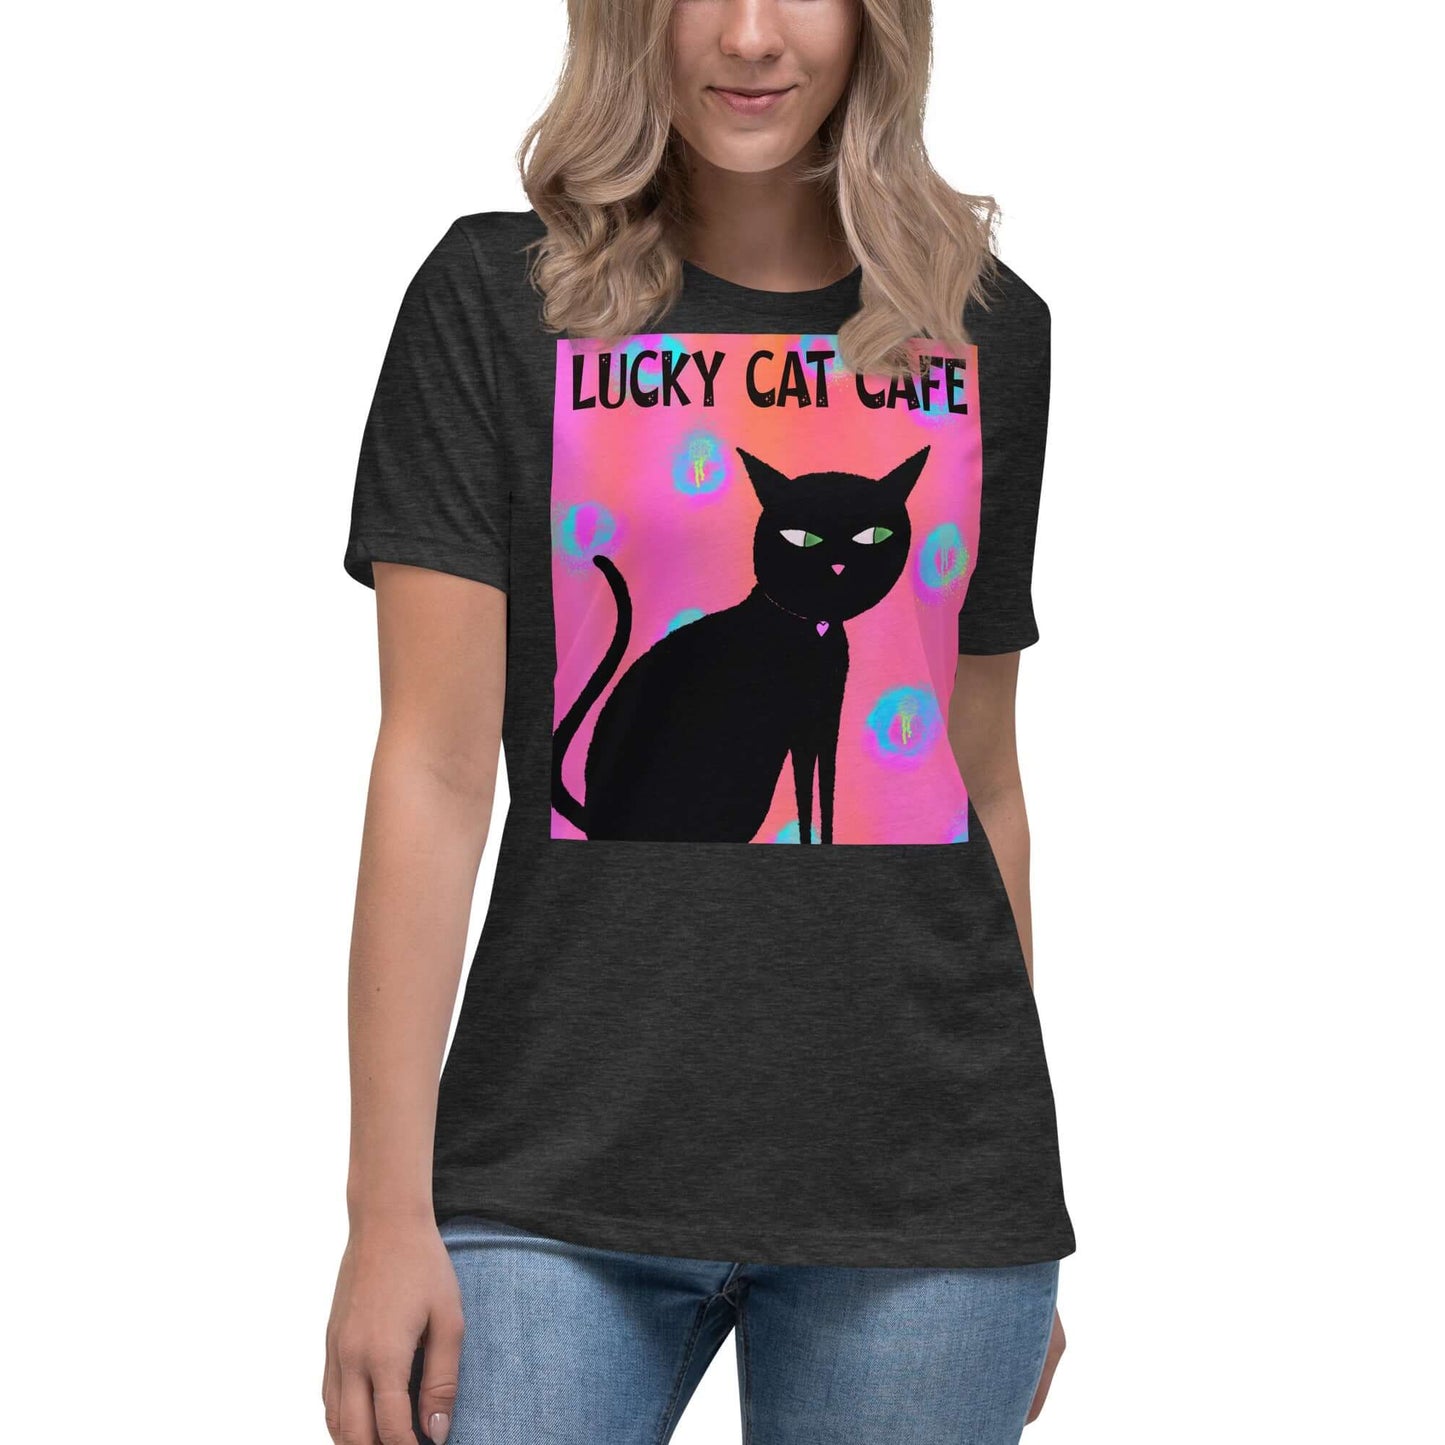 Black Cat on Hot Pink Tie Dye Background with Text “Lucky Cat Cafe” Women’s Short Sleeve Tee in Dark Gray Heather